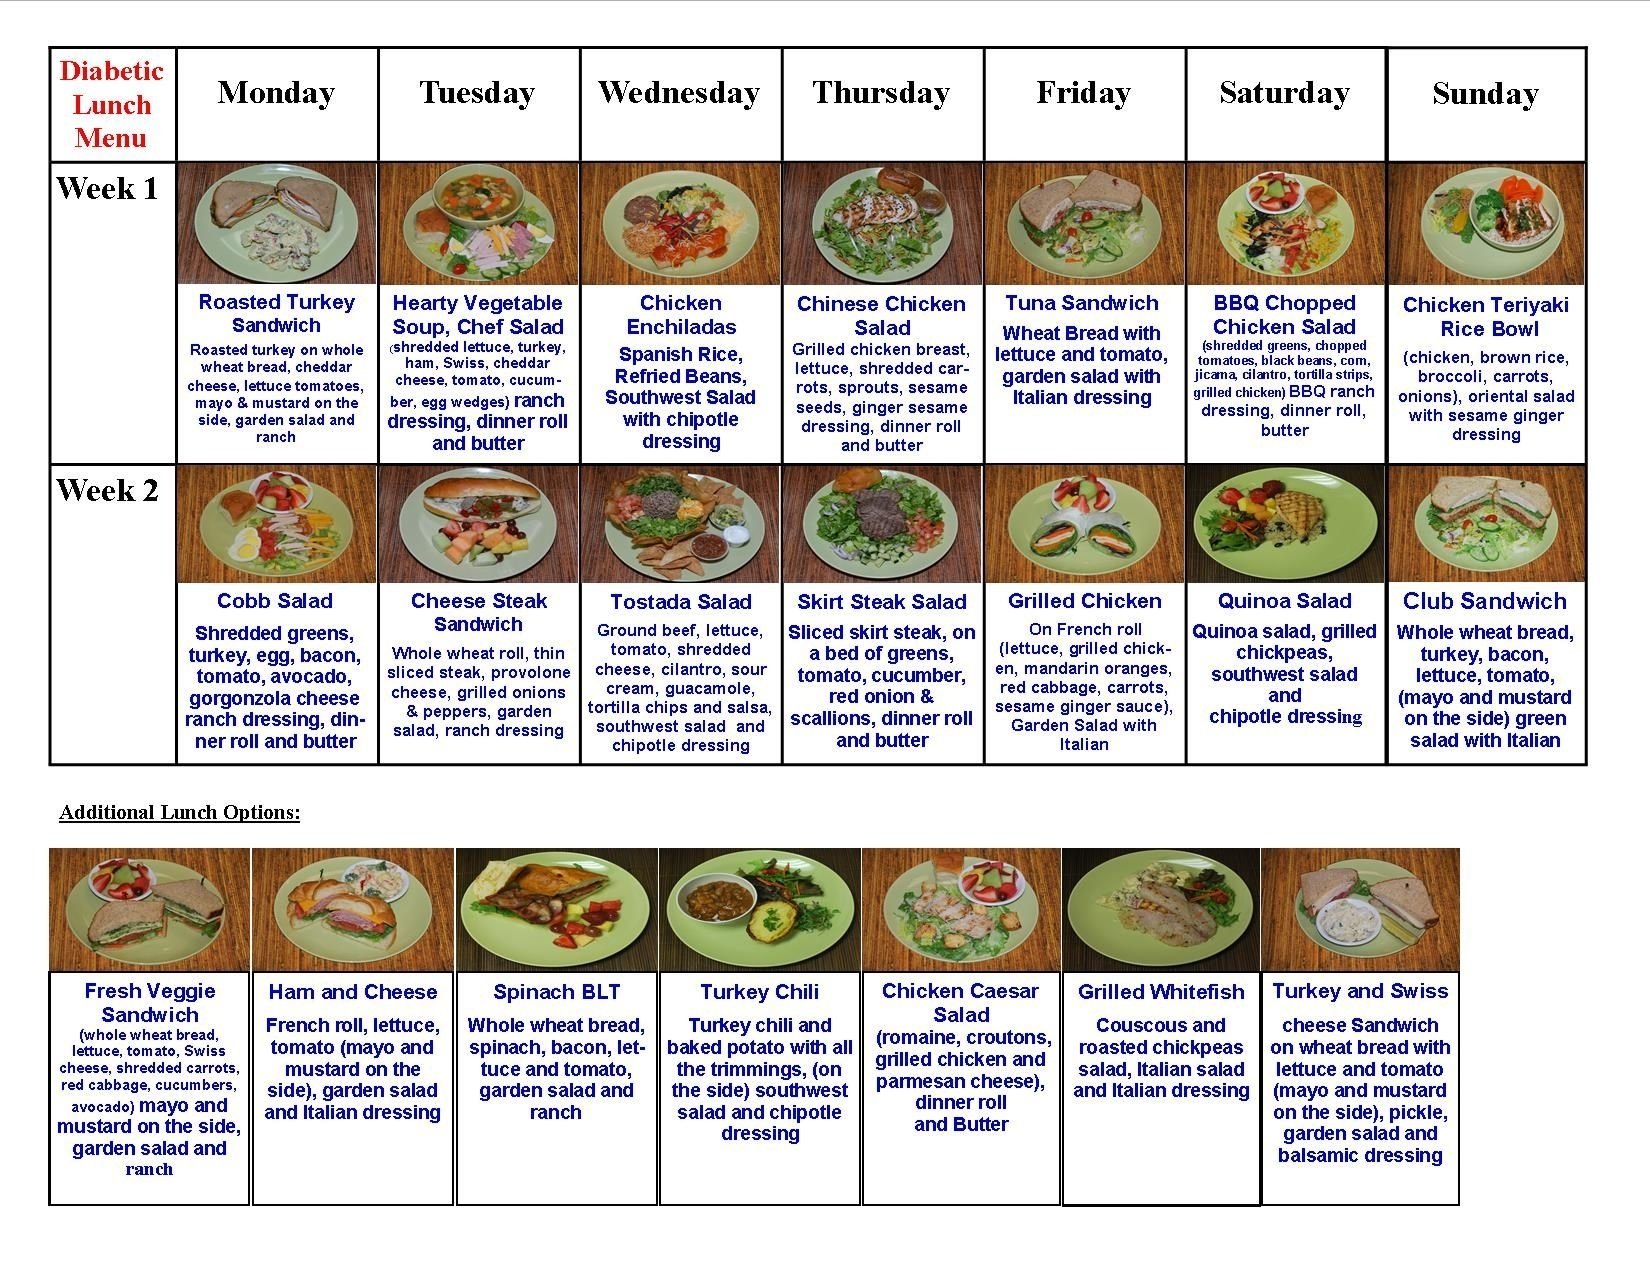 meal planning for diabetics